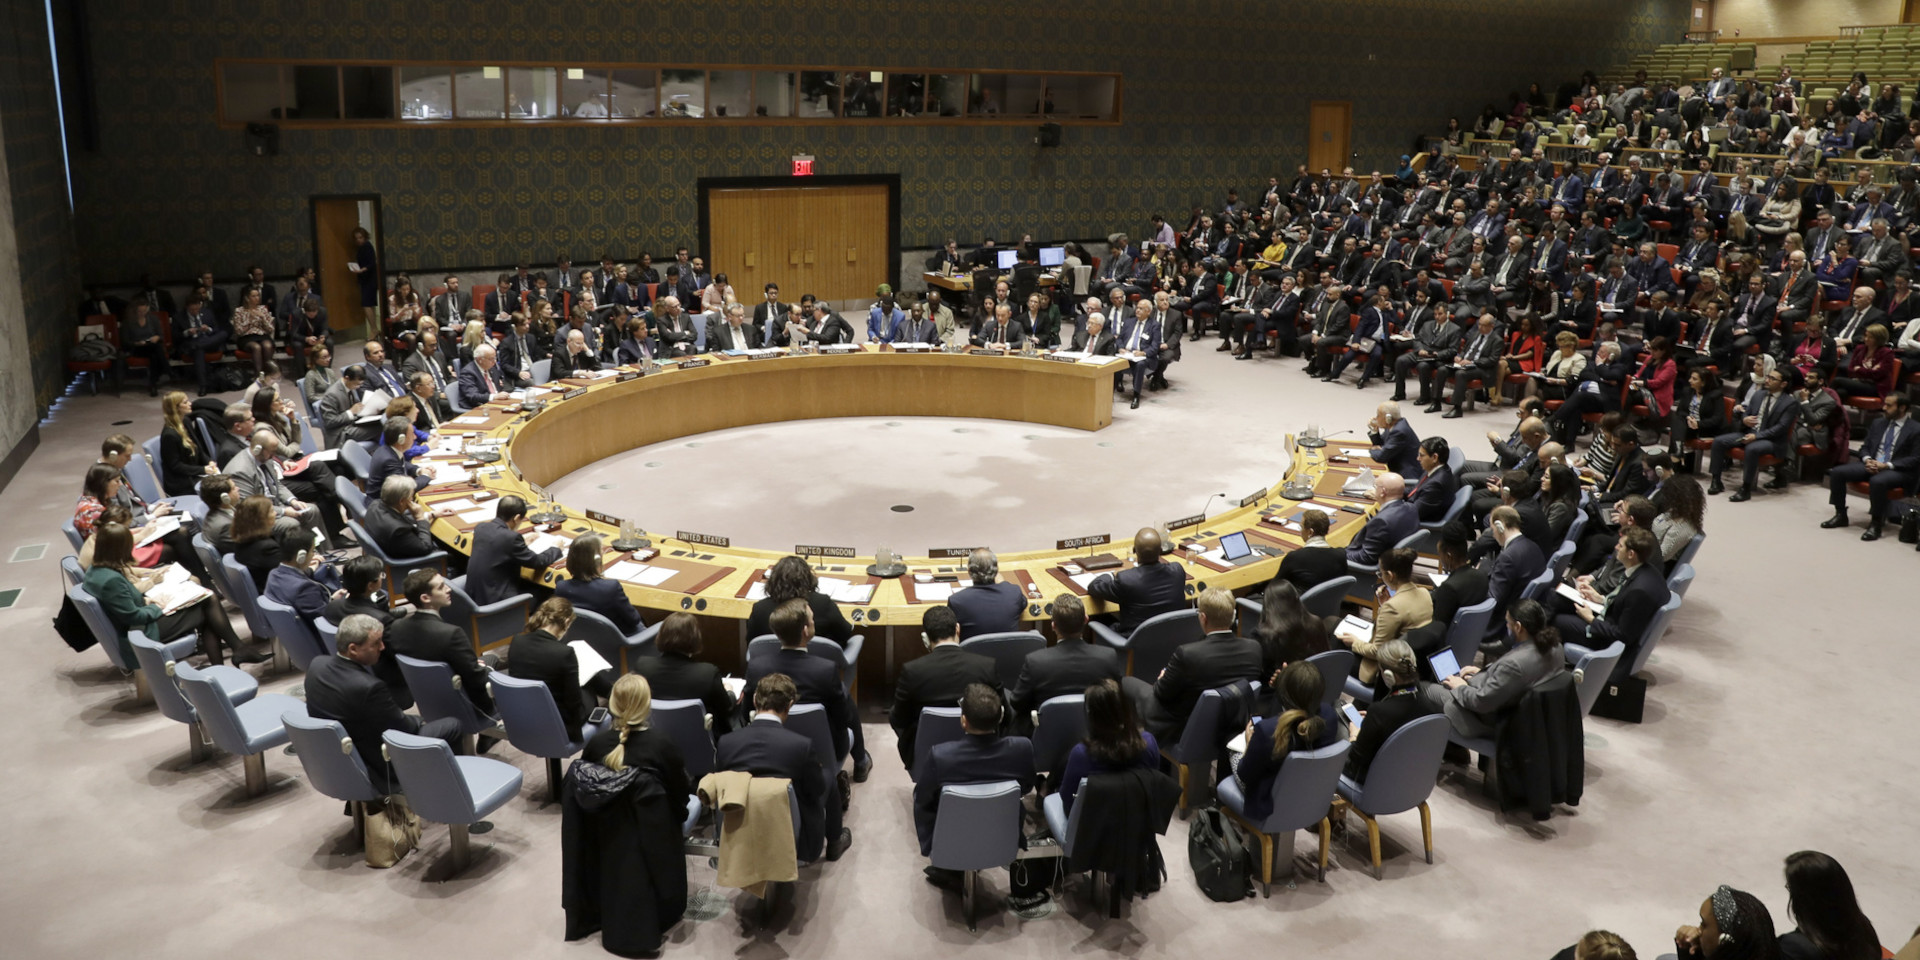 Picture of the UN Security Council: Men and women sitting in a semicircle.